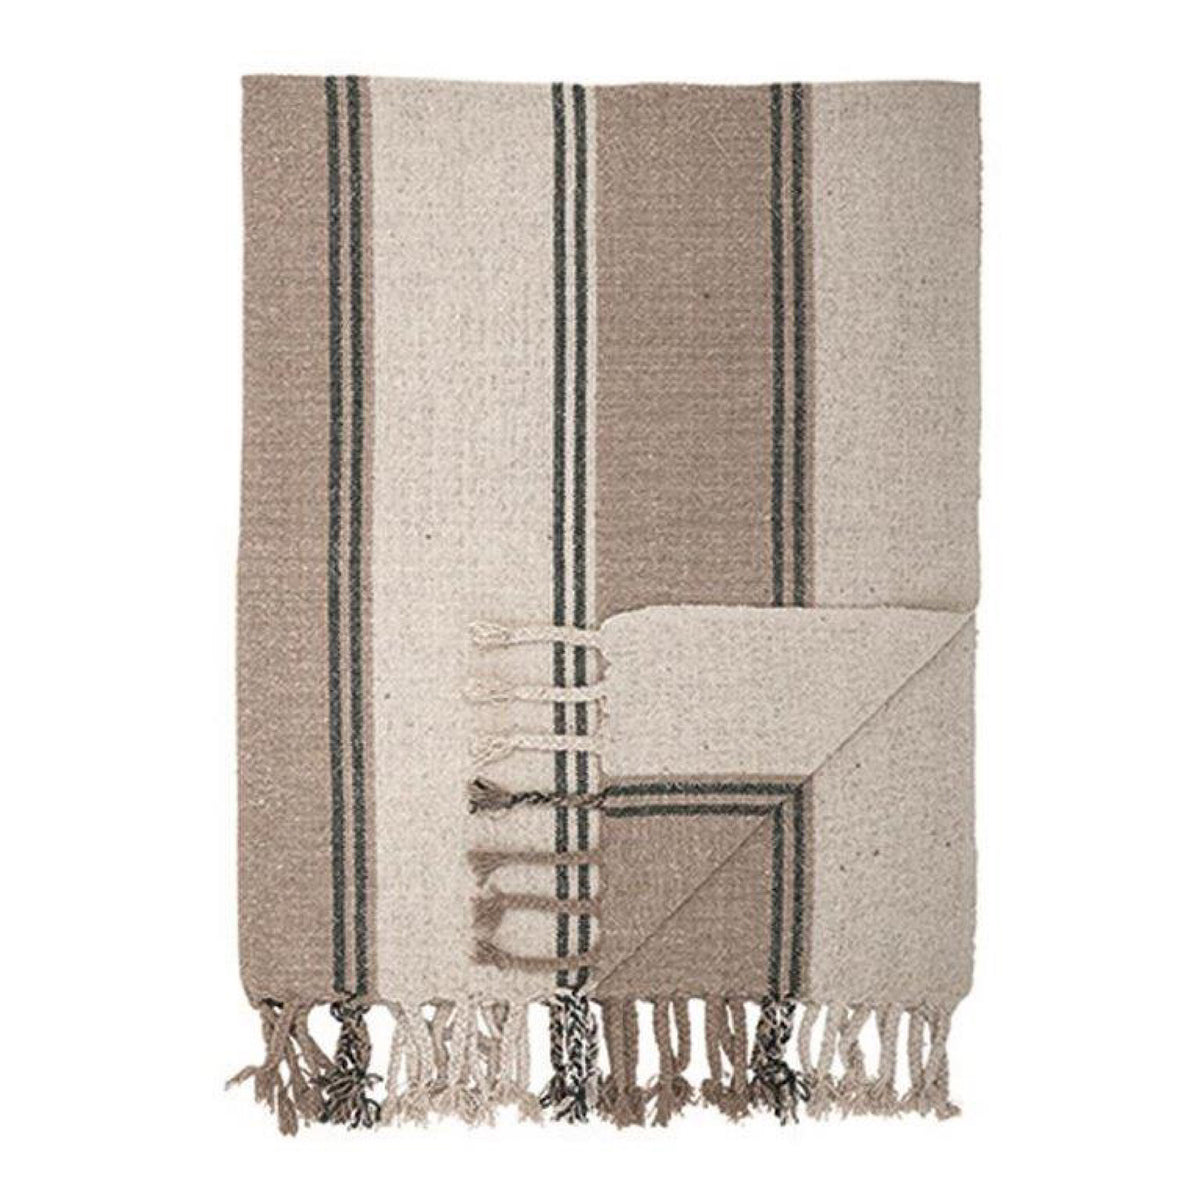 Woven Throw with Tassels